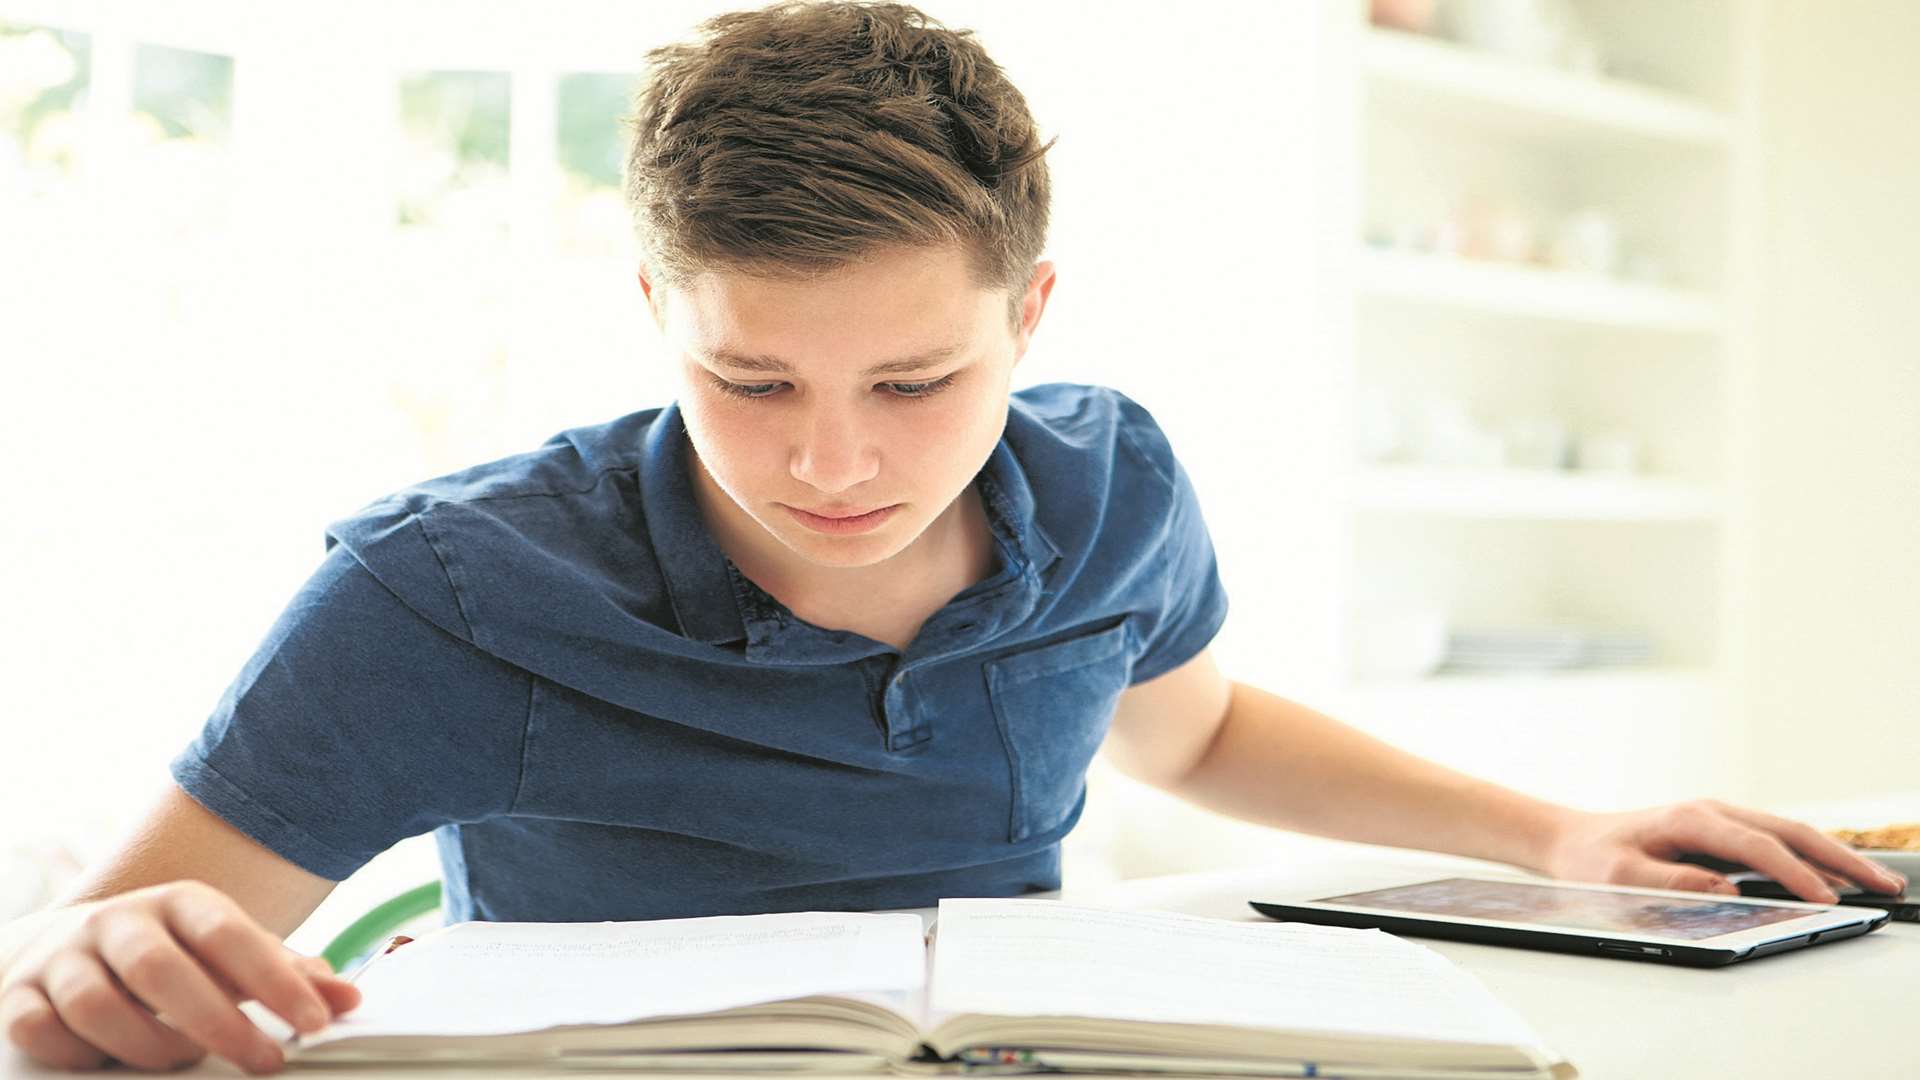 Children admitted to losing focus on their homework to use social media